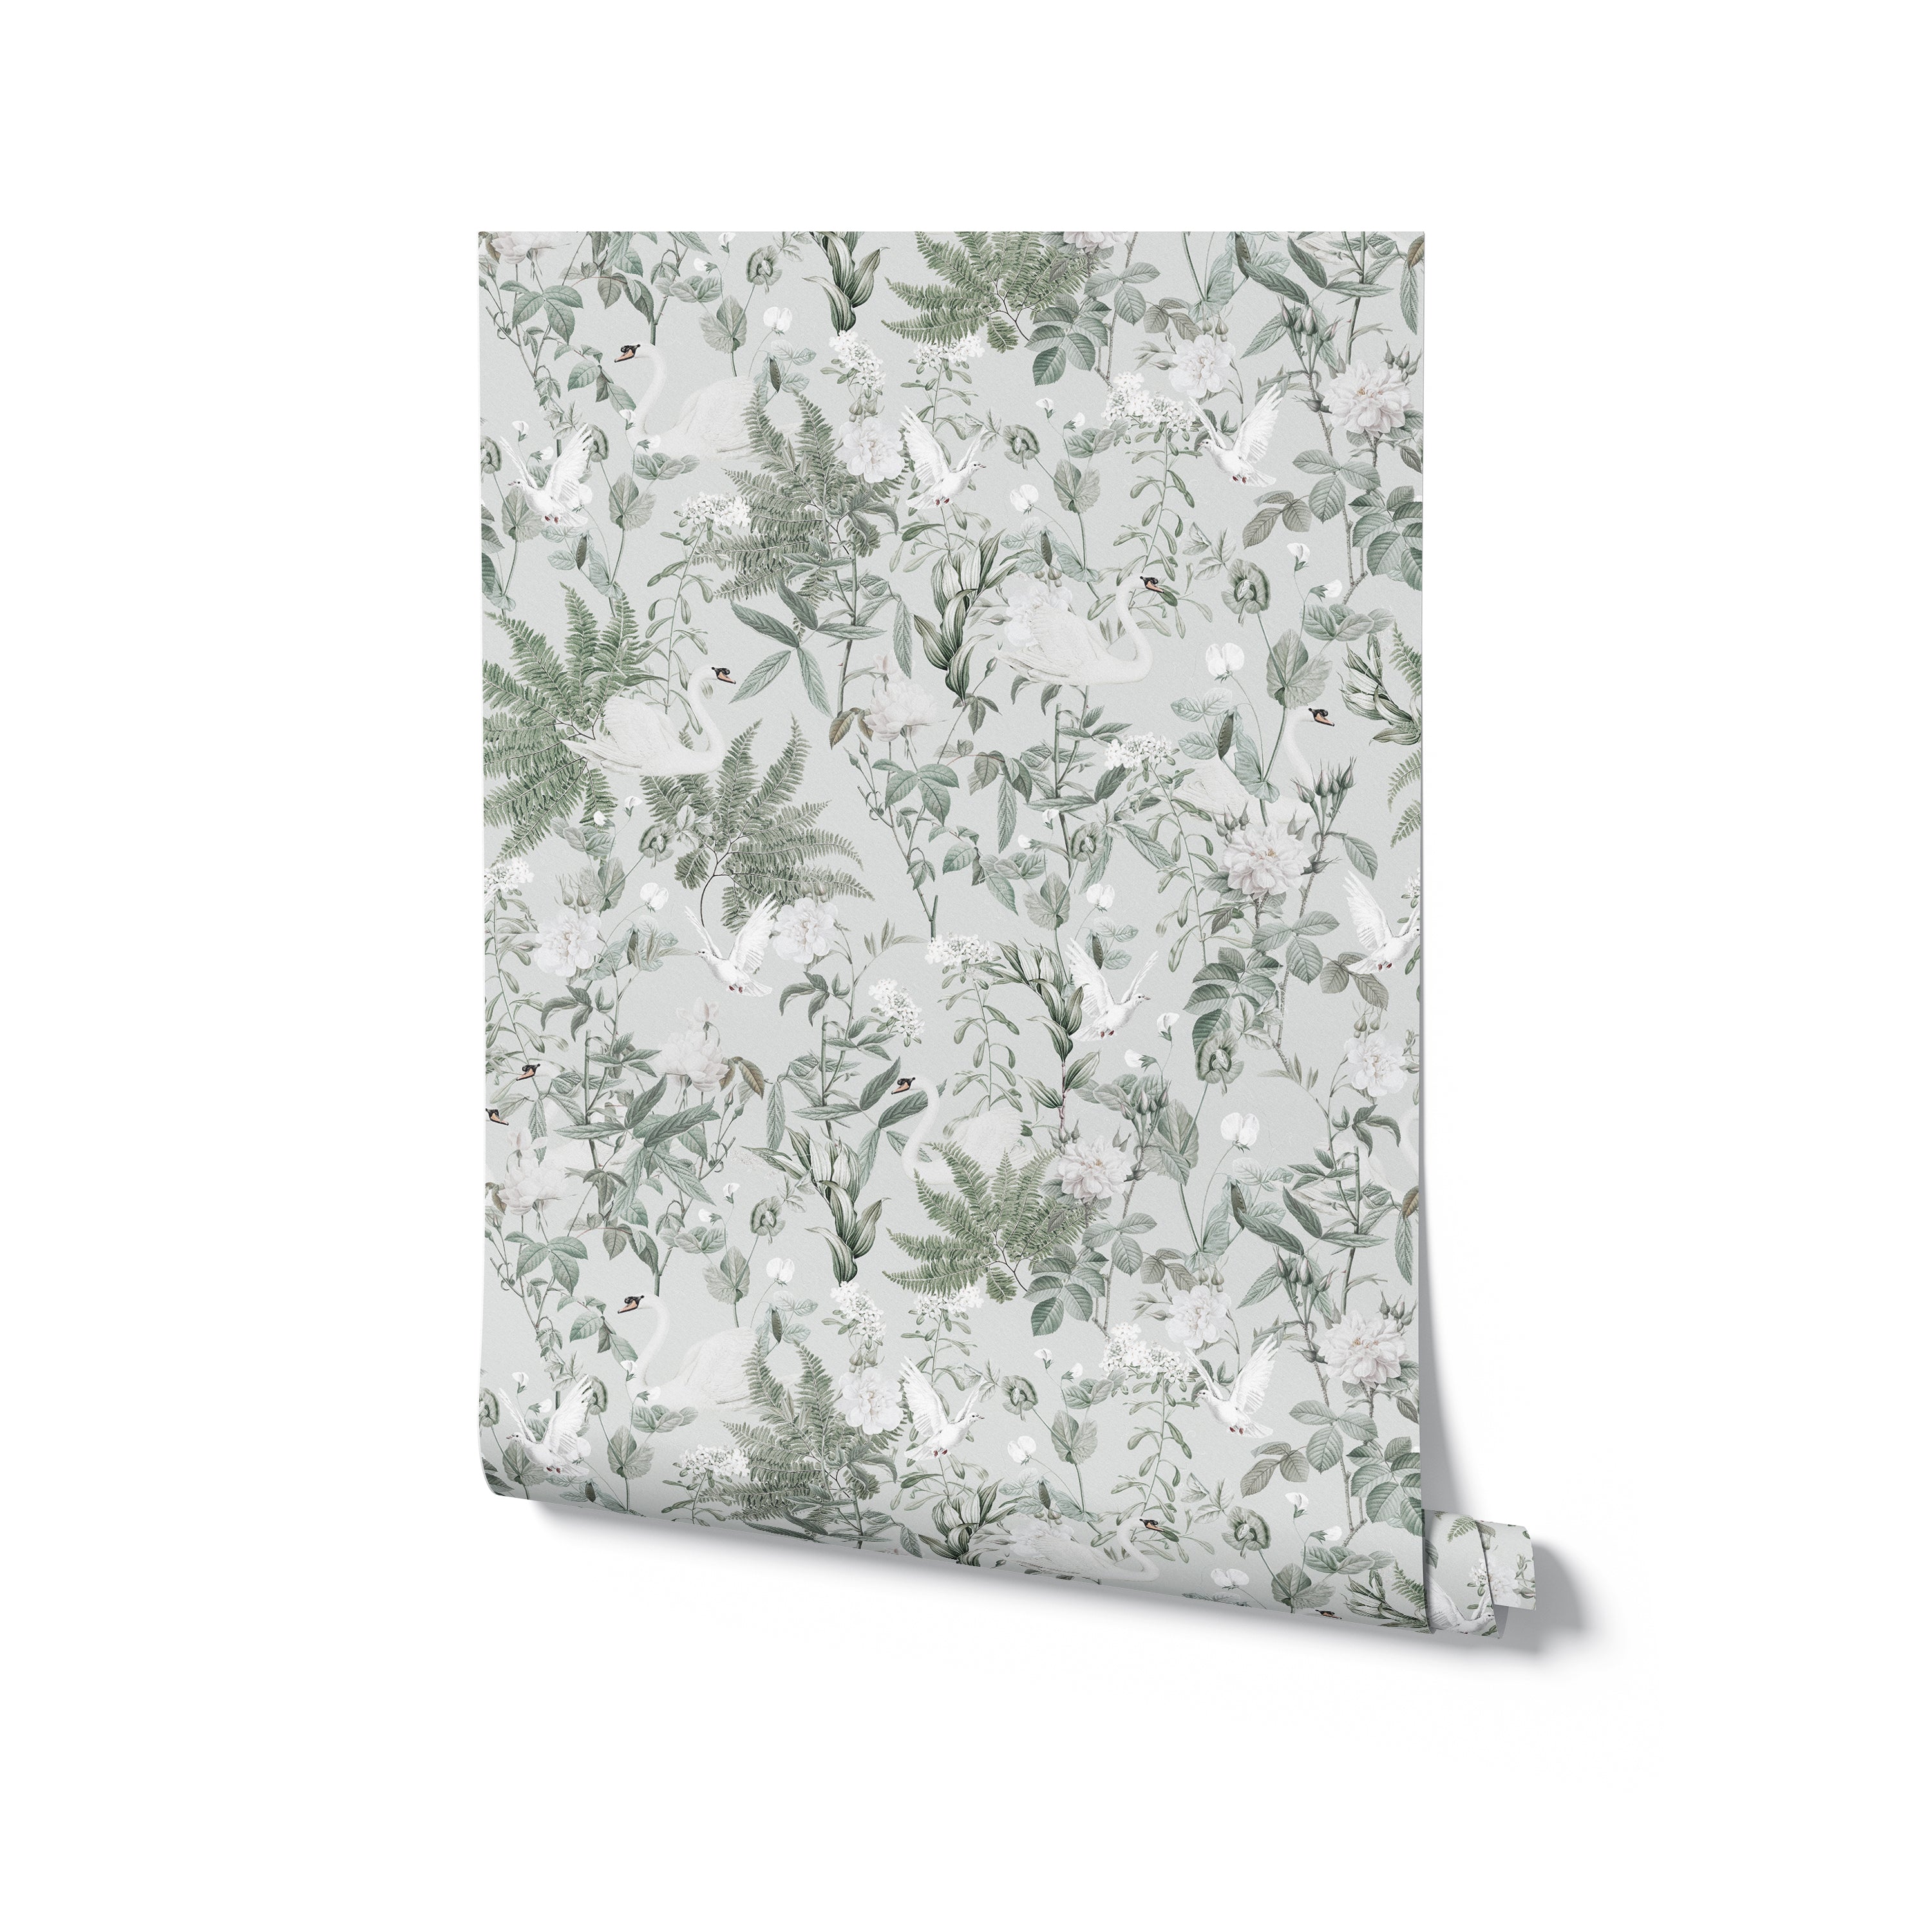 A roll of Sage Bird Wallpaper displayed, showing the soft sage color palette and the detailed design of birds, flowers, and foliage. This wallpaper is perfect for adding a touch of elegance and tranquility to any room.